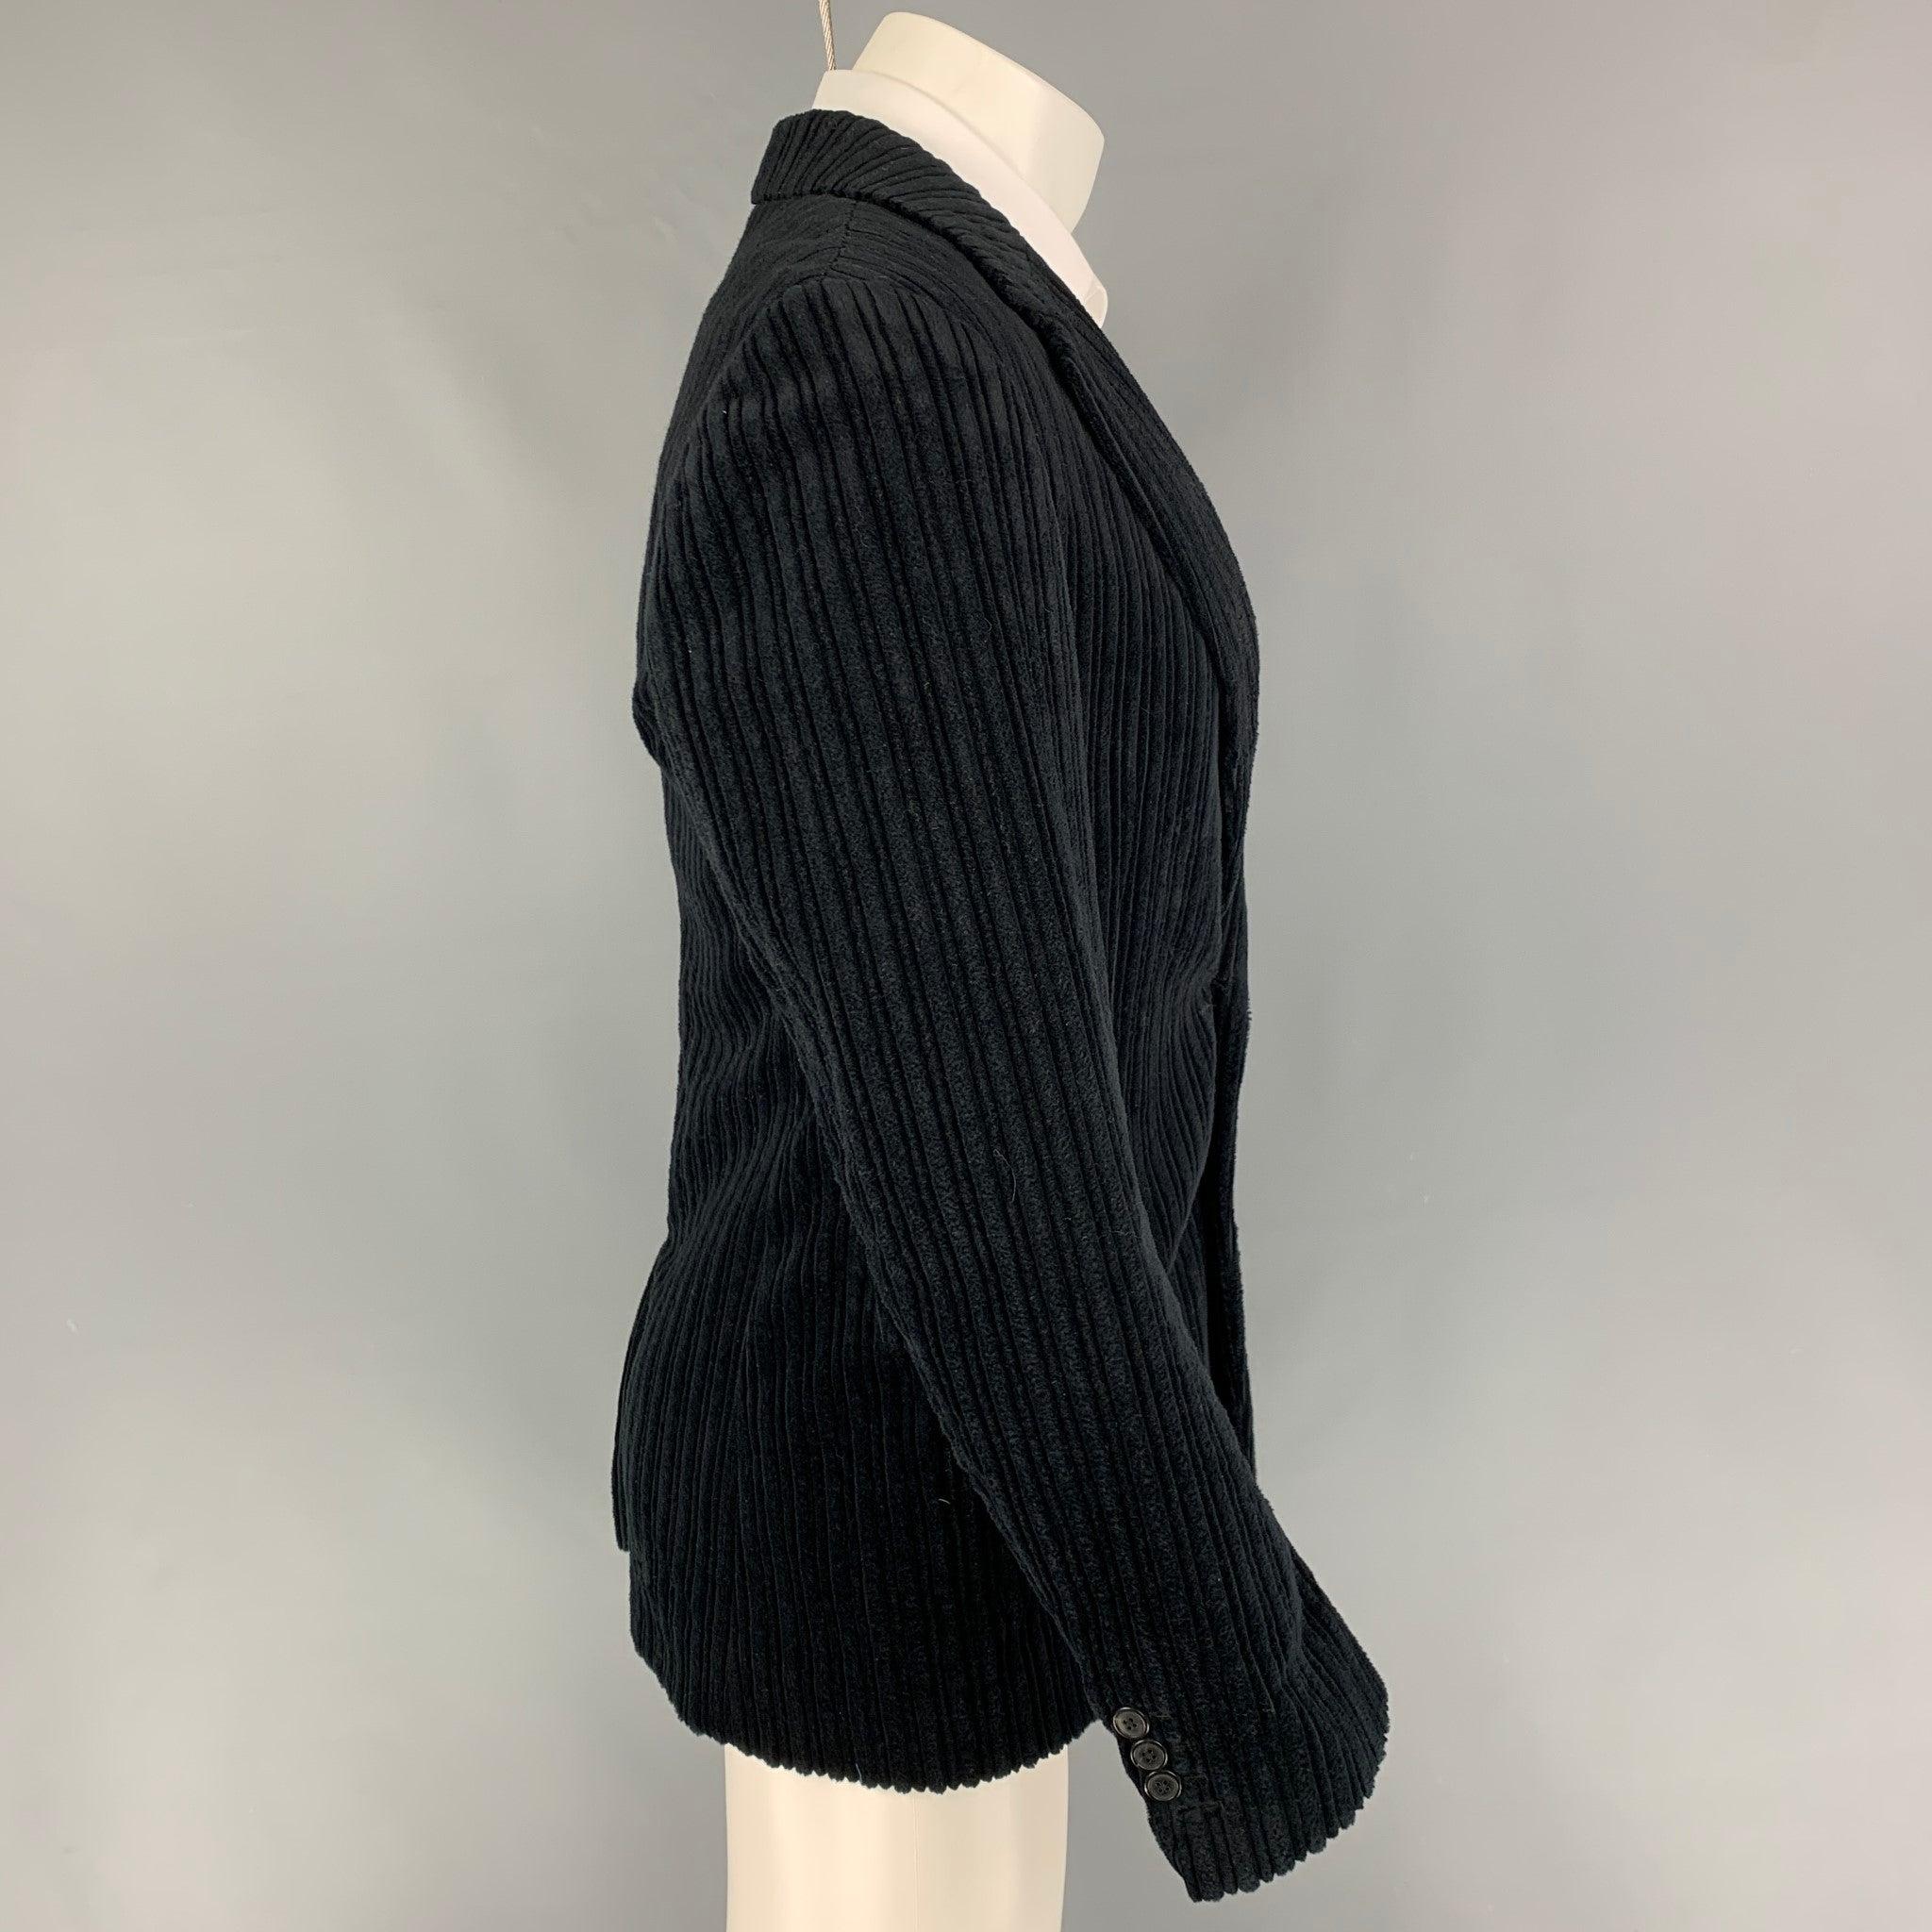 DRIES VAN NOTEN sport coat comes in a black textured velvet cotton with a full liner featuring a notch lapel, flap pockets, single back vent, and a double button closure.
Very Good
Pre-Owned Condition. 

Marked:   46 

Measurements: 
 
Shoulder: